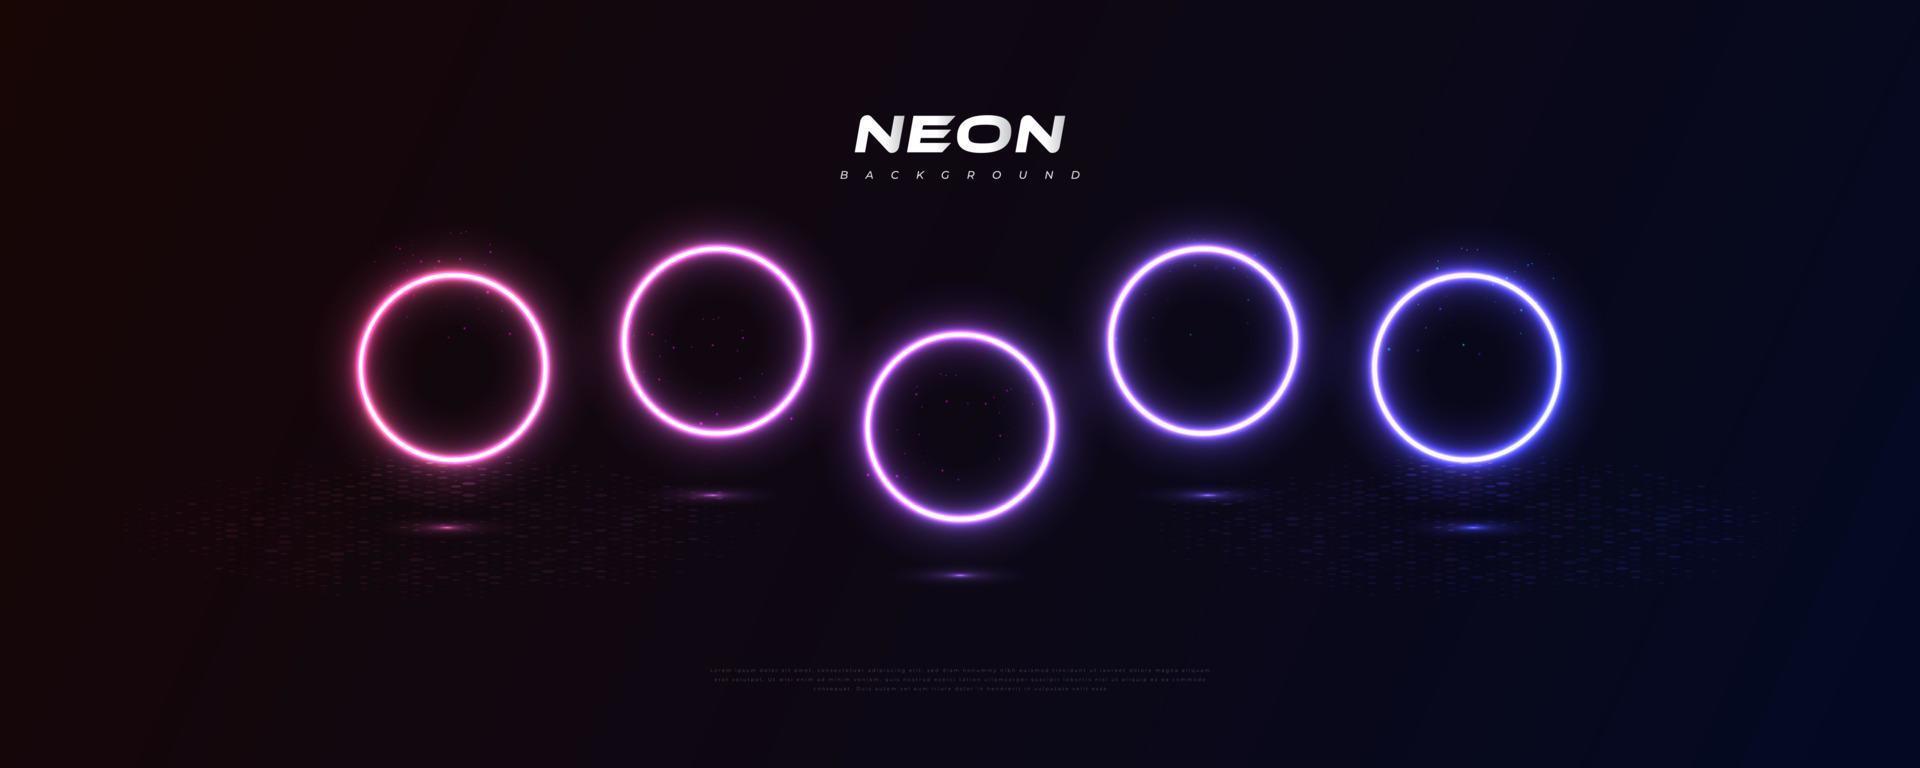 Futuristic Modern Sci-fi Background with Glowing Neon Circles on Dark Background. Abstract Blue And Purple Neon Light Shapes On Black Background vector